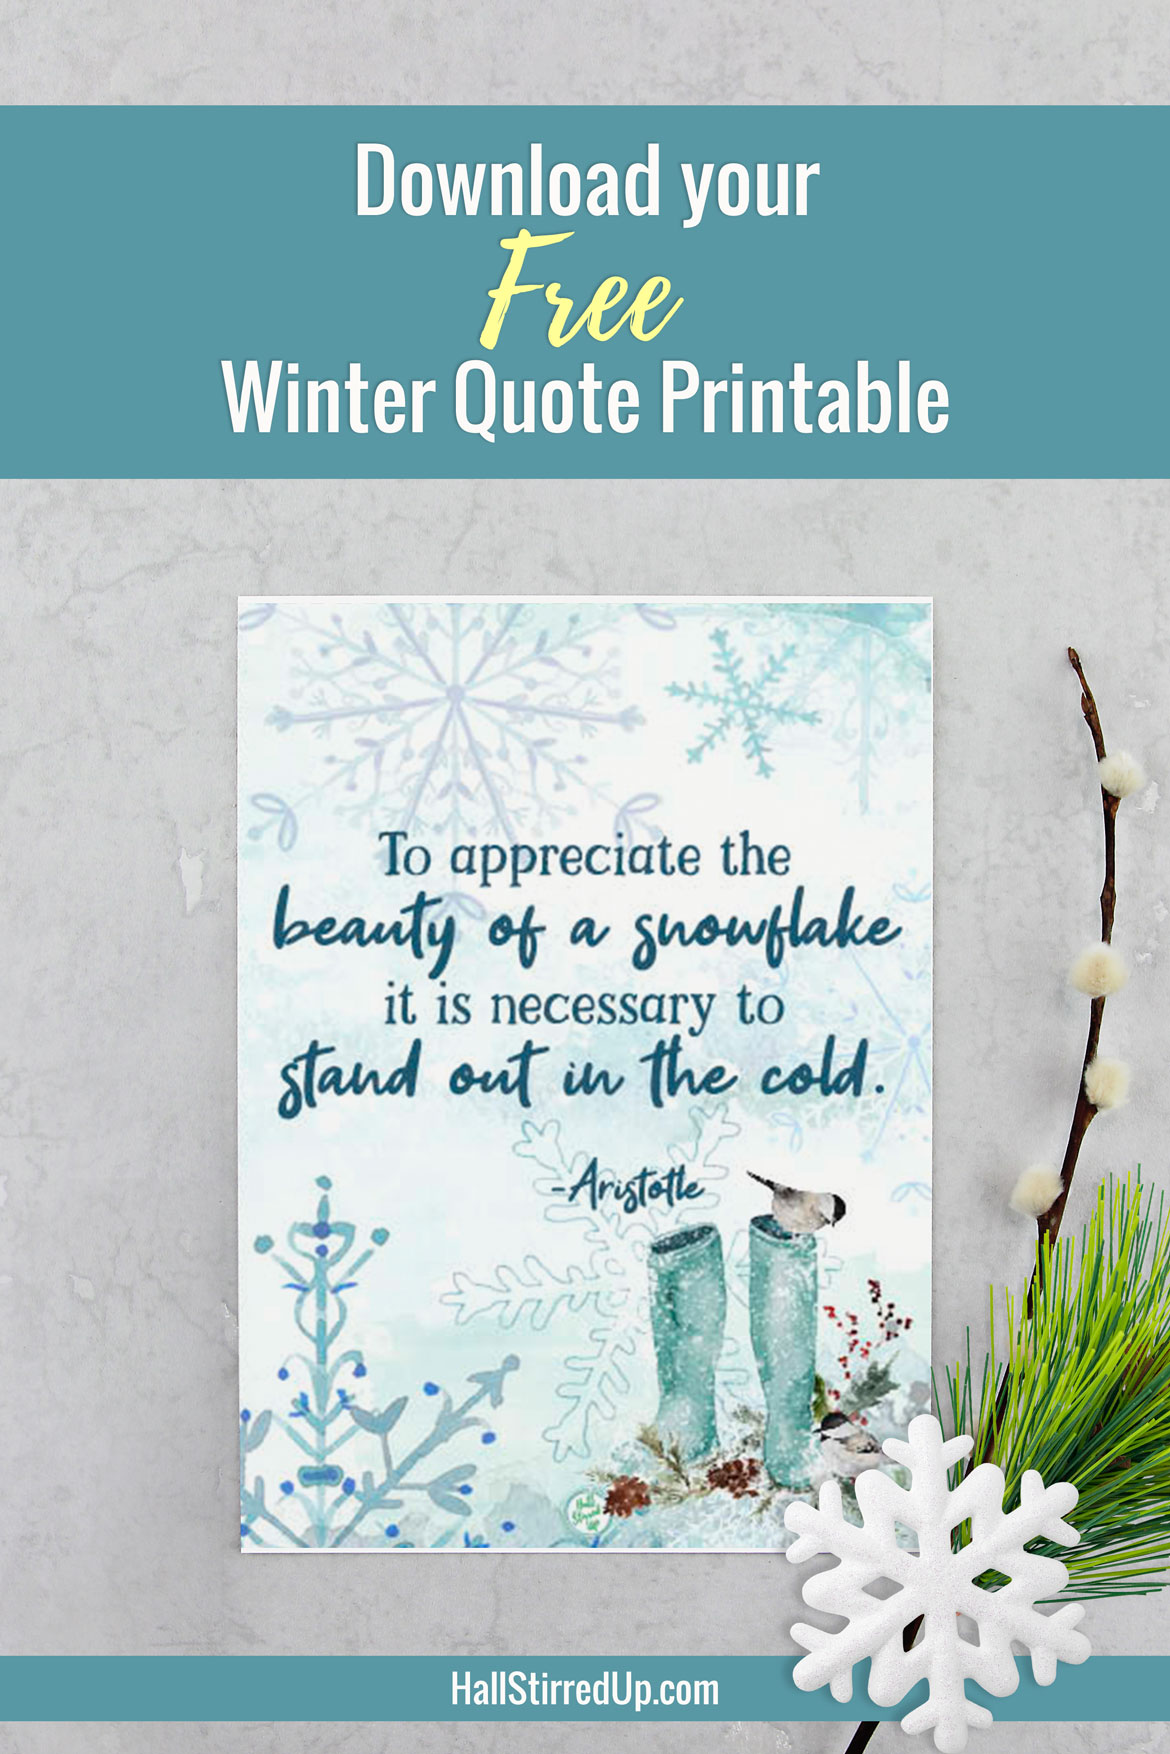 My favorite Winter quote and a new printable